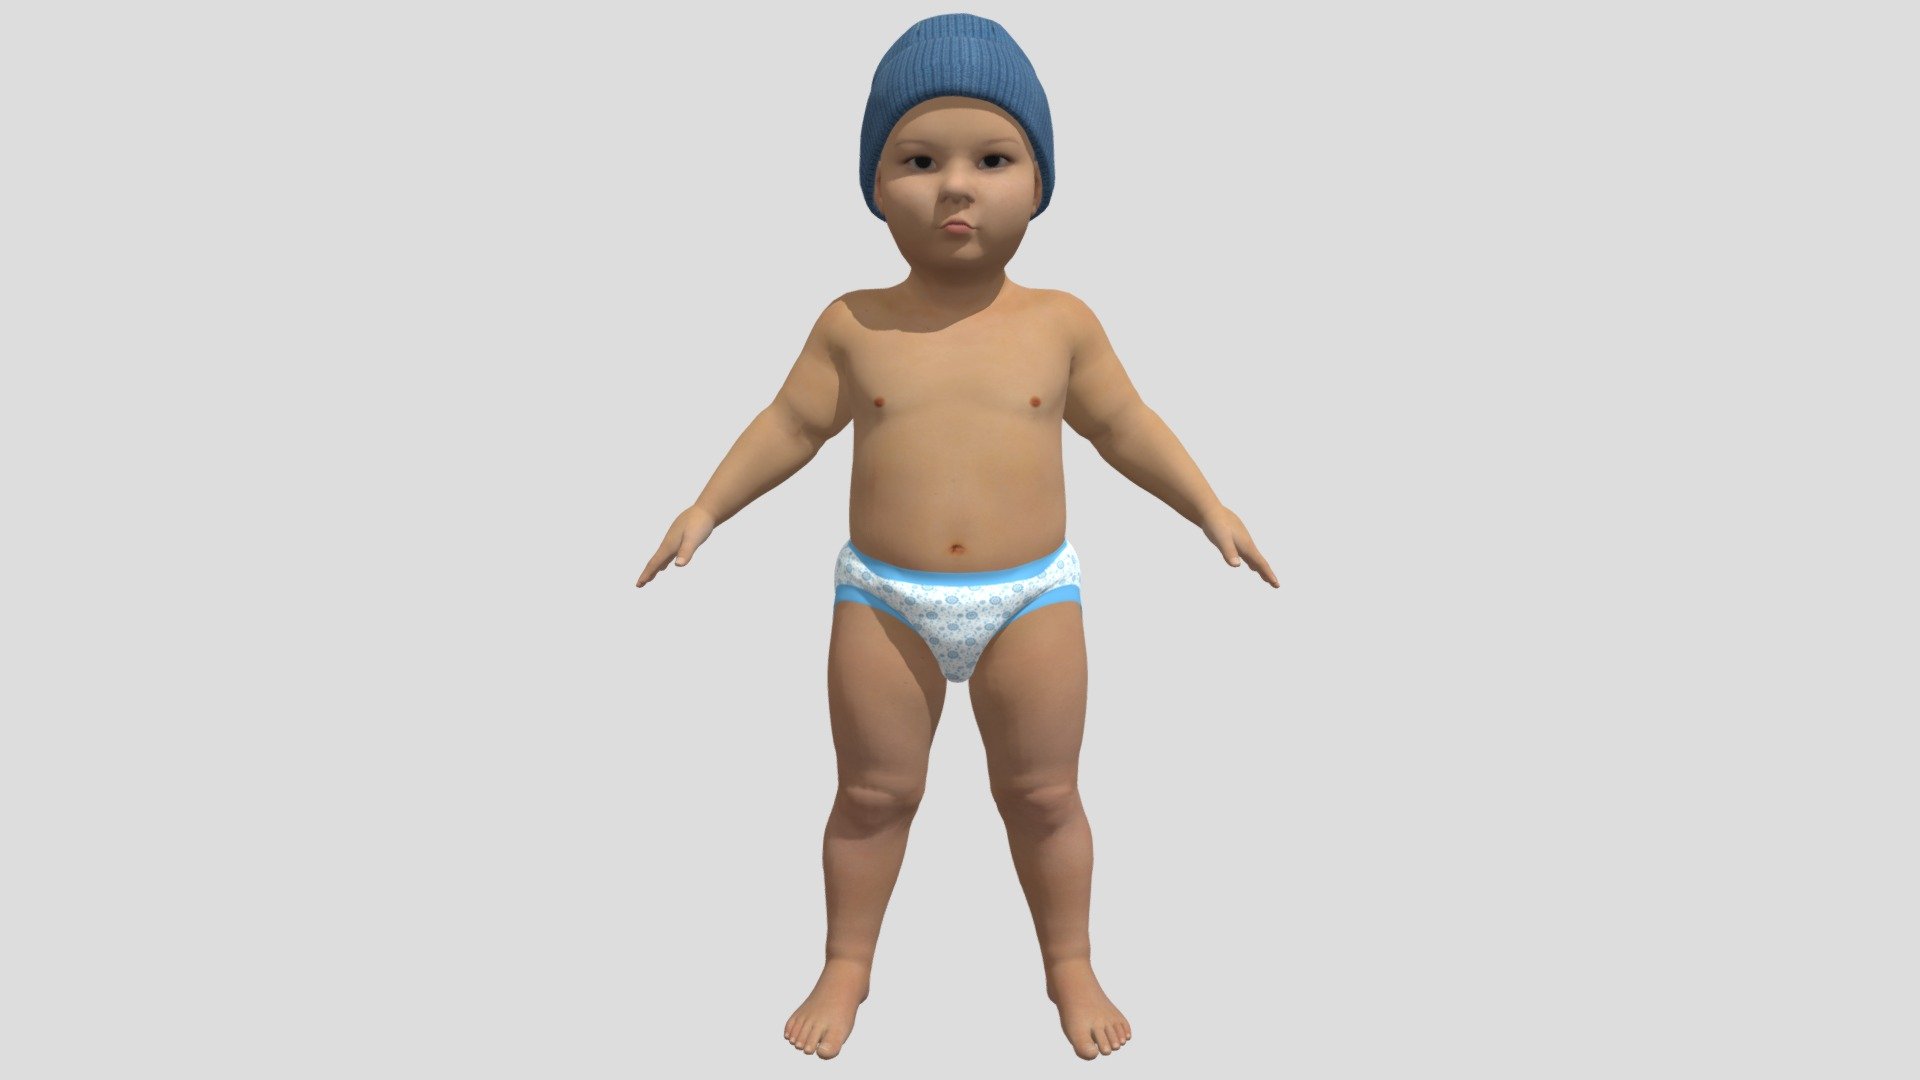 Toddler 3D model is a high quality, photo real model that will enhance detail and realism to any of your game projects or commercials. The model has a fully textured, detailed design that allows for close-up renders. Features: • High quality polygonal model, with detailed texture • Maya 2019 V-Ray and standard materials scenes along with multiple other file formats. • Texture files are given in .jpg formats for easy access 3d model